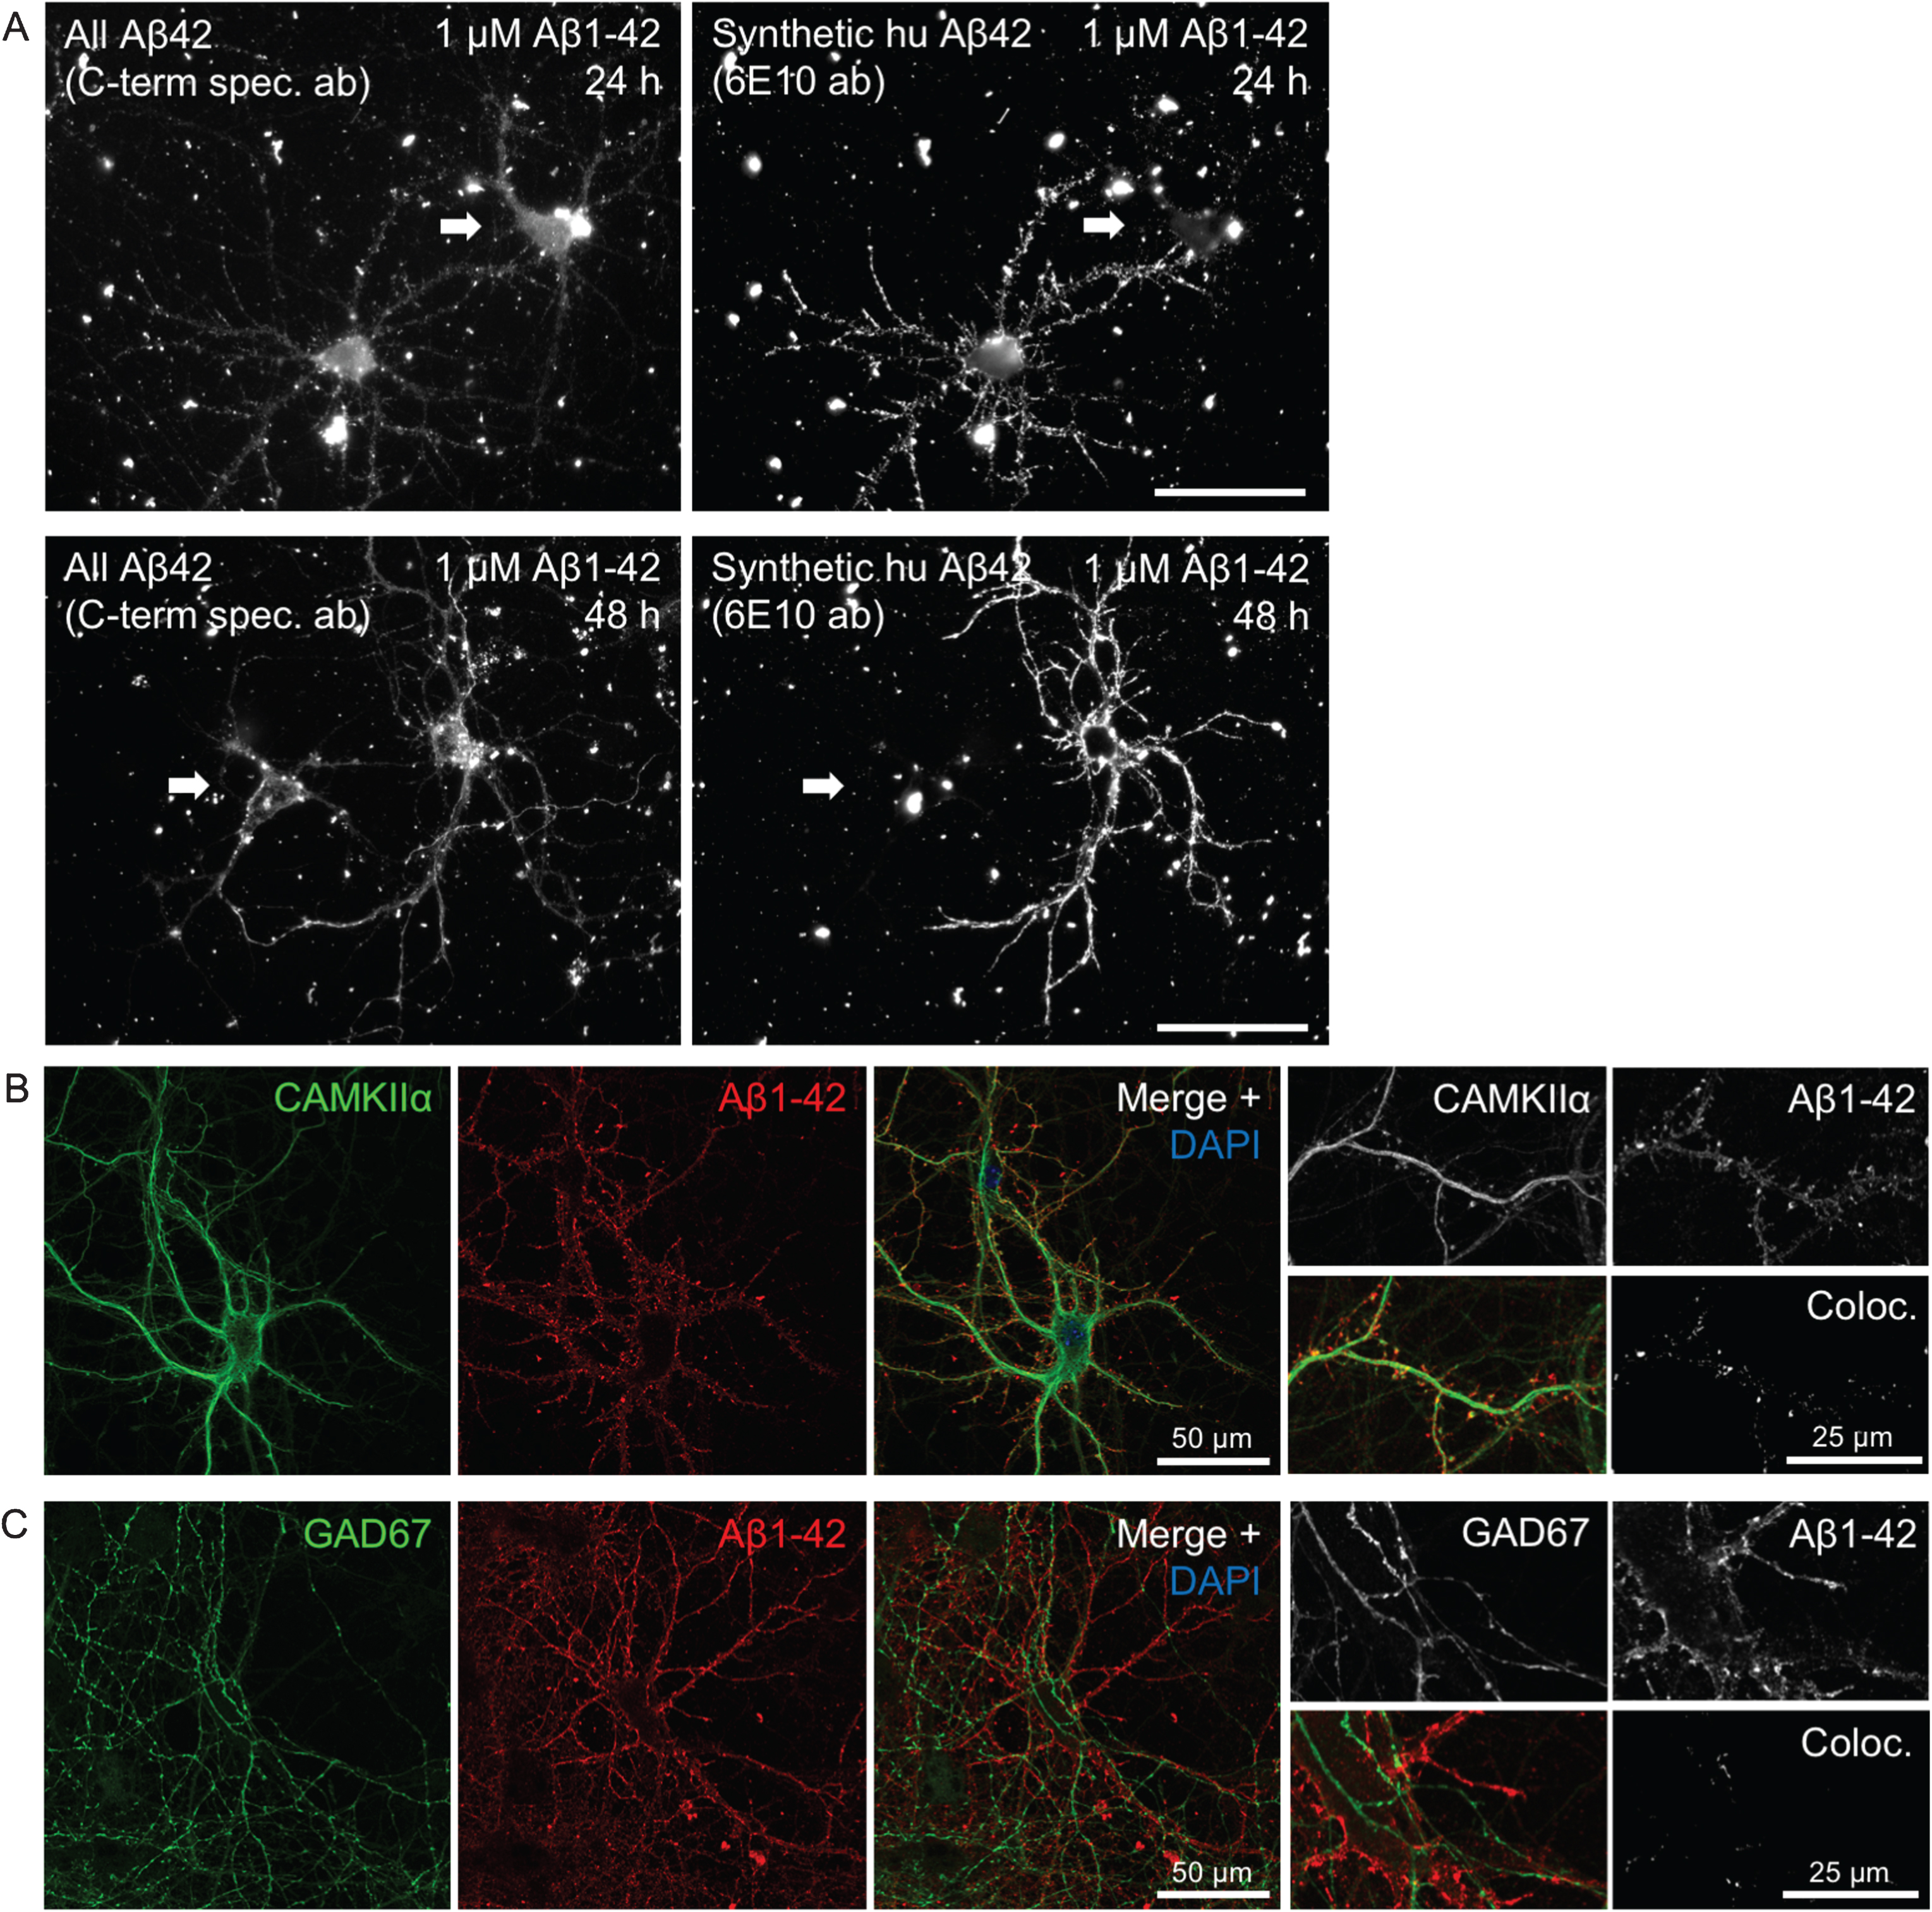 Heterogeneity in Aβ1 - 42 binding and internalization. A) Only certain neurons in culture accumulate synthetic Aβ1 - 42 in a punctate pattern along the processes. Epifluorescent imaging of wt primary mouse neurons treated with 1 μM human Aβ1 - 42 for 24 h or 48 h. Labeling with a C-terminal specific Aβx - 42 antibody (left panels) showing both endogenous mouse Aβ42 and the added human synthetic Aβ1 - 42, displays two large neurons in each of these images. However, the exogenously added human Aβ1 - 42, recognized by antibody 6E10 (right panels), accumulates predominantly only in one of the two neurons, including their processes. Note the brighter labeling with the high affinity antibody 6E10 of only one of the two neurons in the right image panels. Scale bars 50 μm. B-C) Accumulation of exogenously added Aβ1 - 42 for 30 min is more pronounced in excitatory CamKII-positive compared to inhibitory GAD67-positive neurons. B) Aβ1 - 42 accumulation in some but not all, and not exclusively in, neurons labeled with CamKIIα. Higher magnification images (right) with Aβ1 - 42 in CamKIIα-positive synaptic terminals that appear more consistent with dendritic spines. C) Aβ1 - 42 was not seen accumulating in any GAD67-positive neurons.